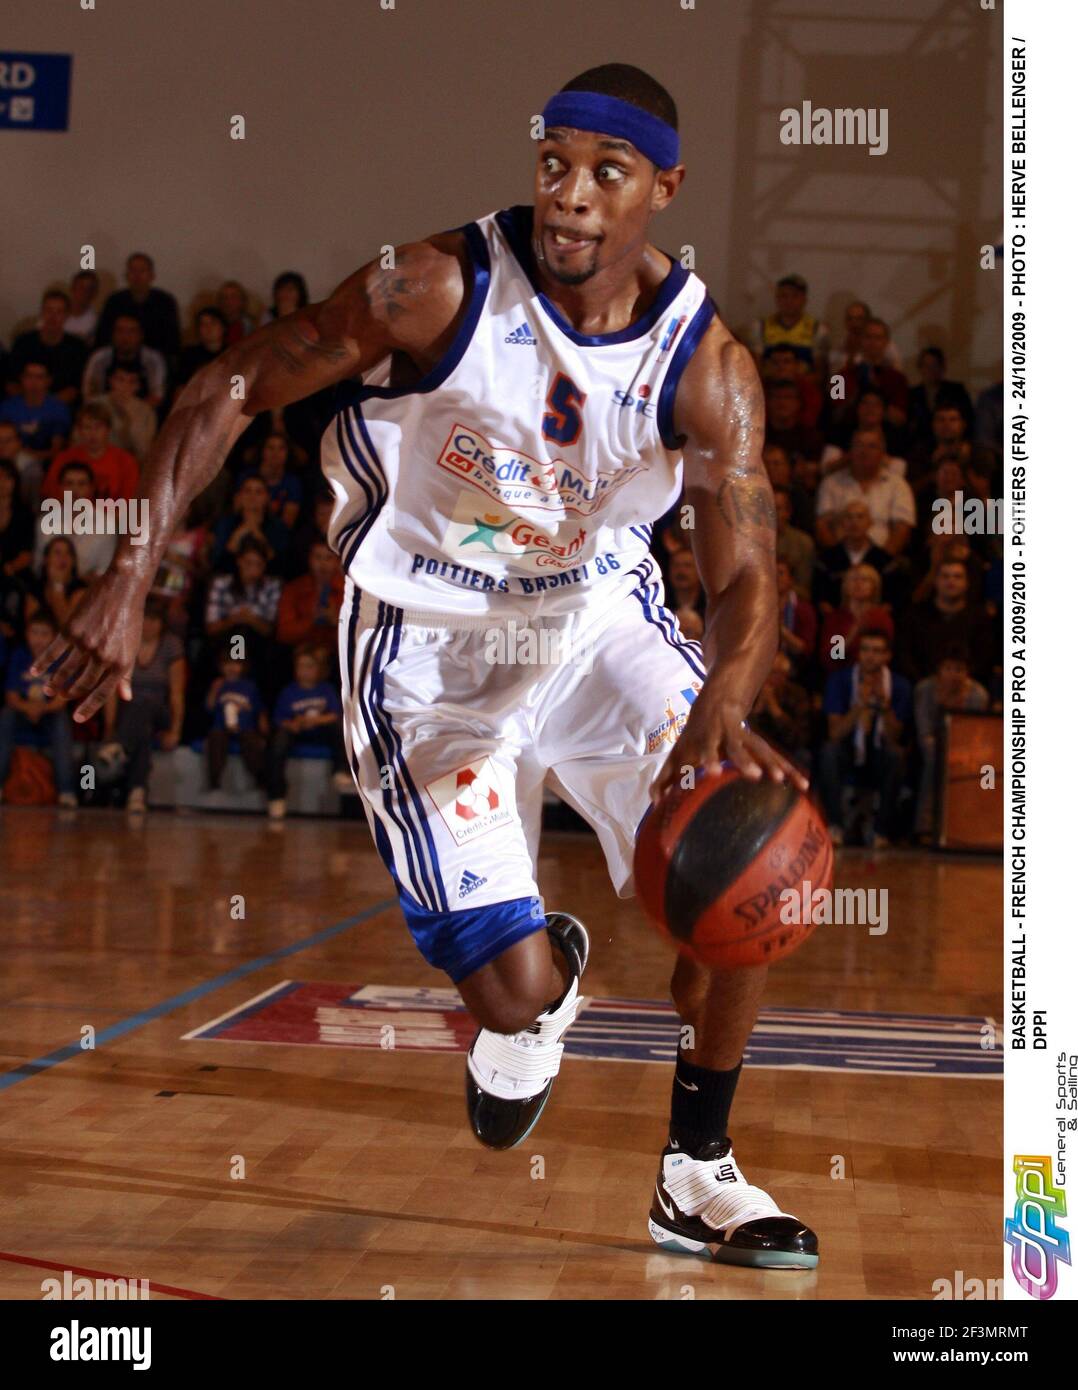 BASKETBALL - FRENCH CHAMPIONSHIP PRO A 2009/2010 - POITIERS (FRA) -  24/10/2009 - PHOTO : HERVE BELLENGER / DPPI POITIERS V TOULON - RASHEED  WRIGHT (POITIERS Stock Photo - Alamy